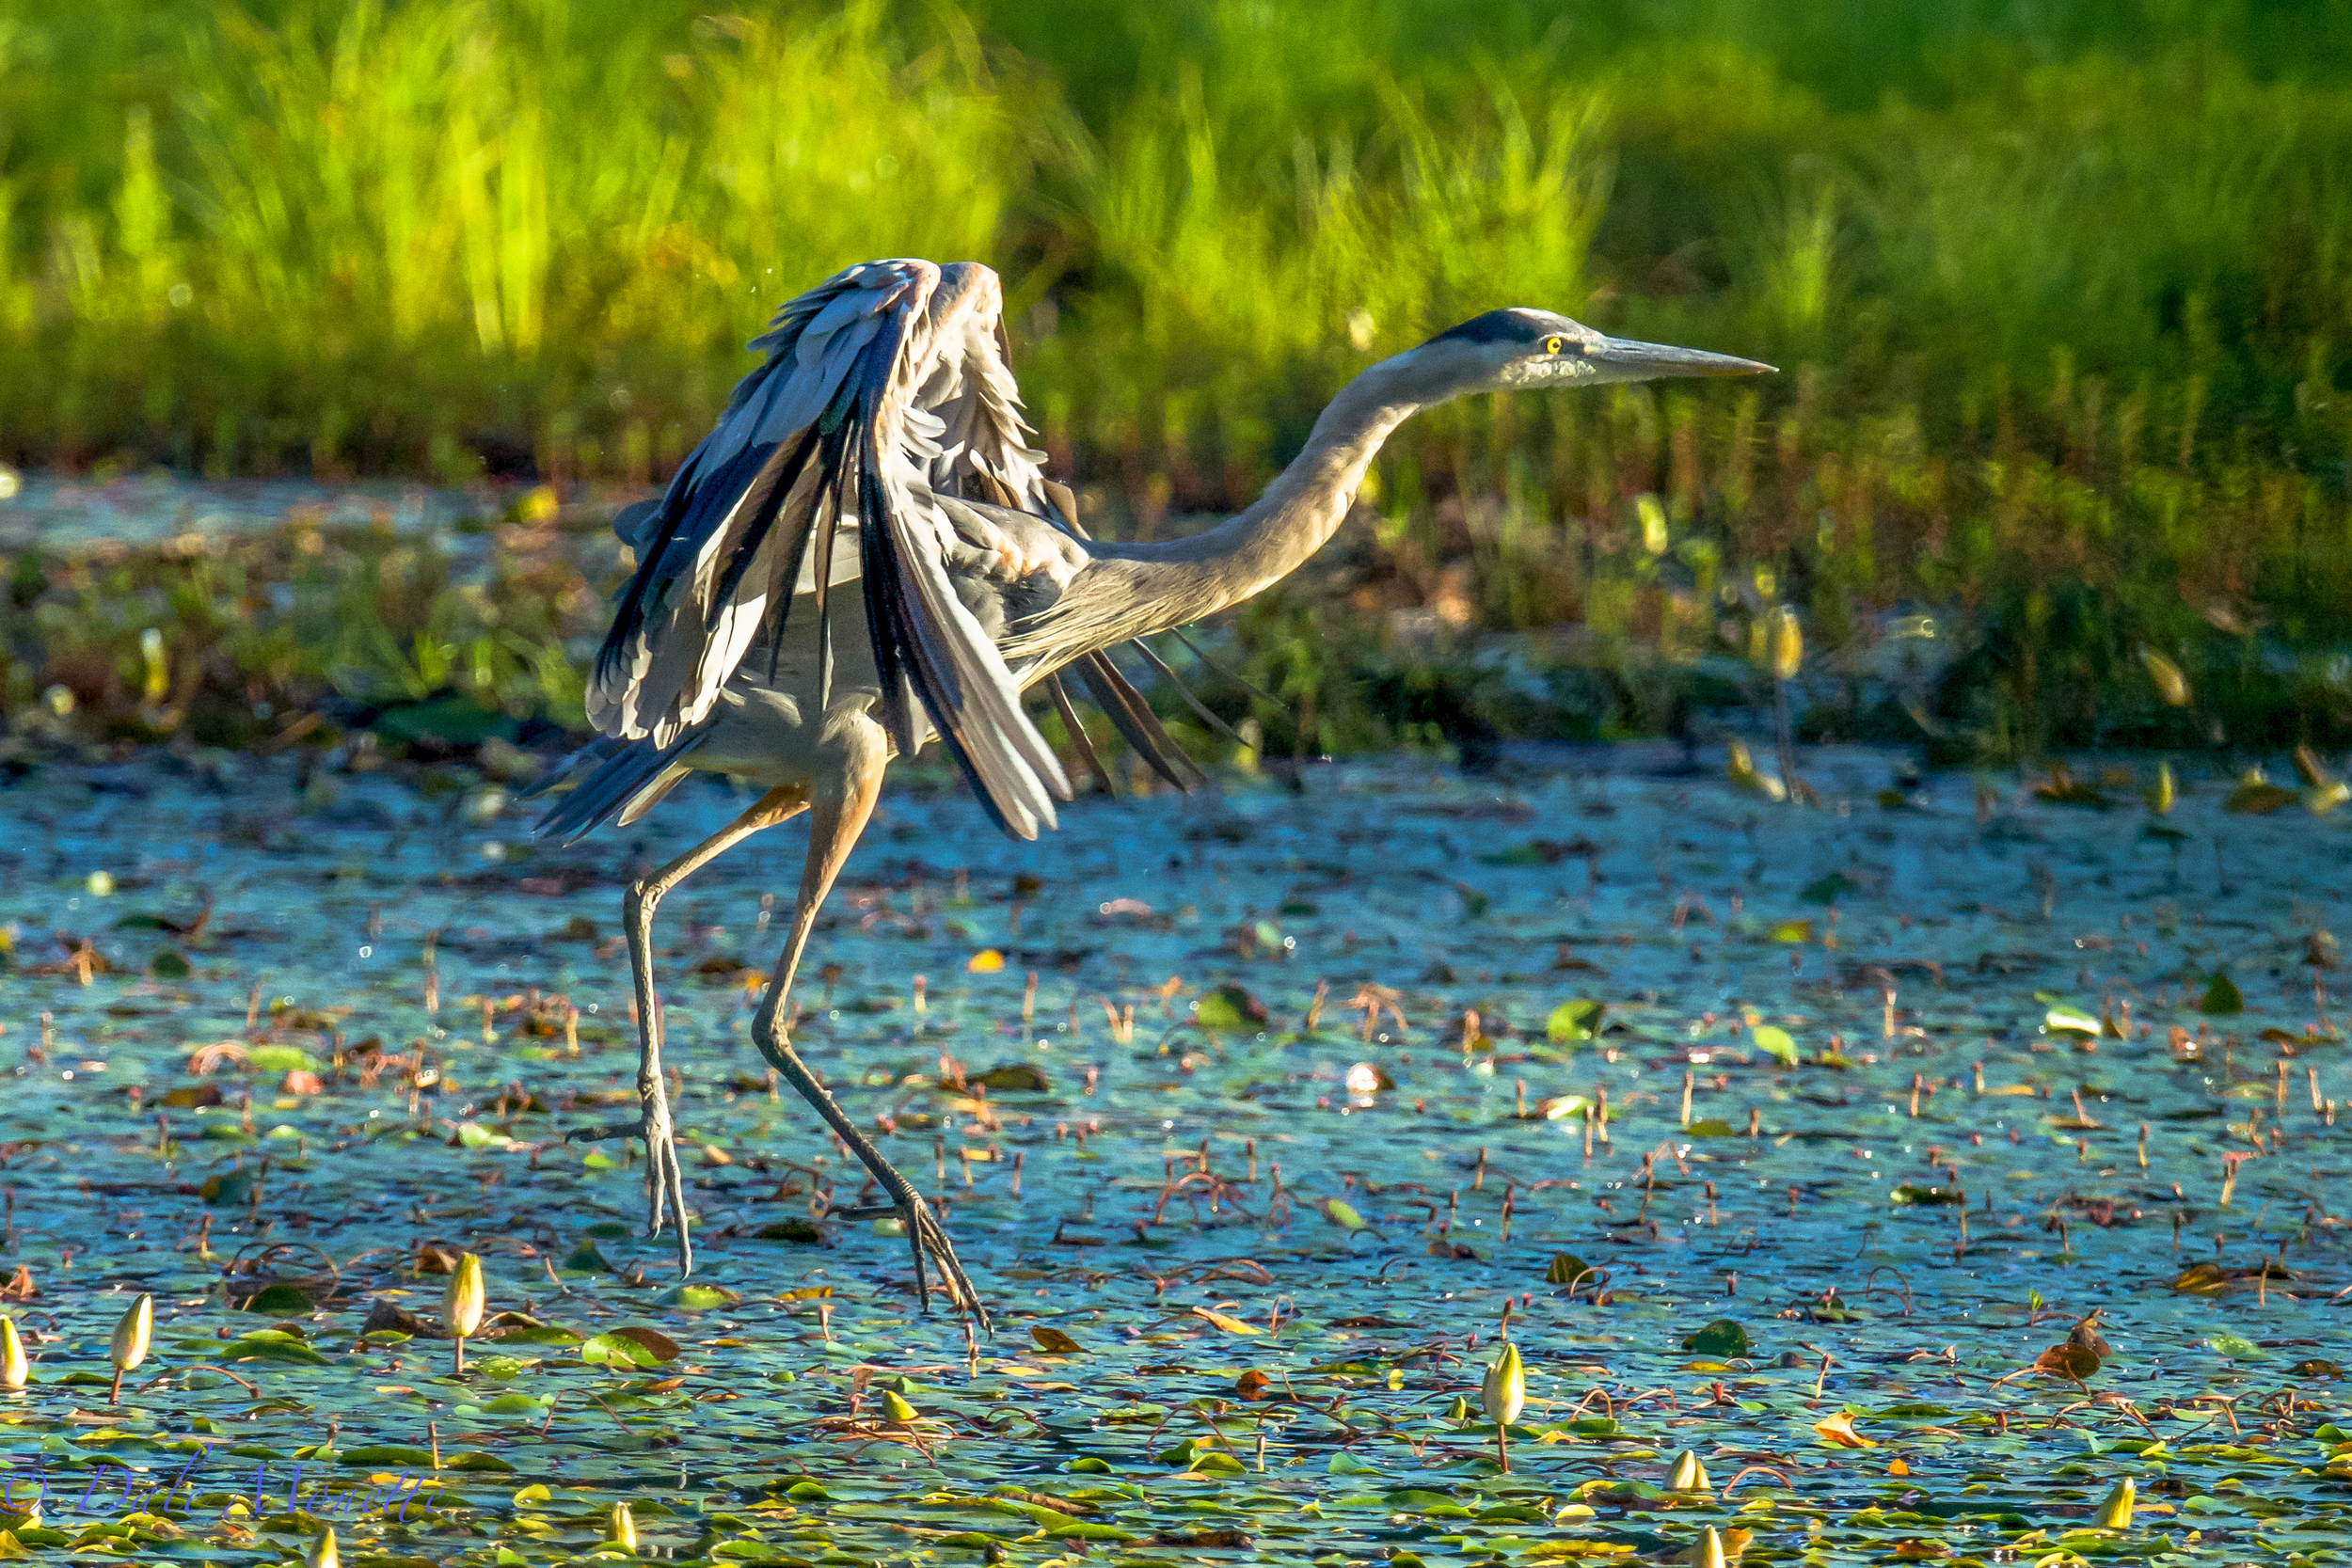 Great blue heron coming in to land. 7/25/15